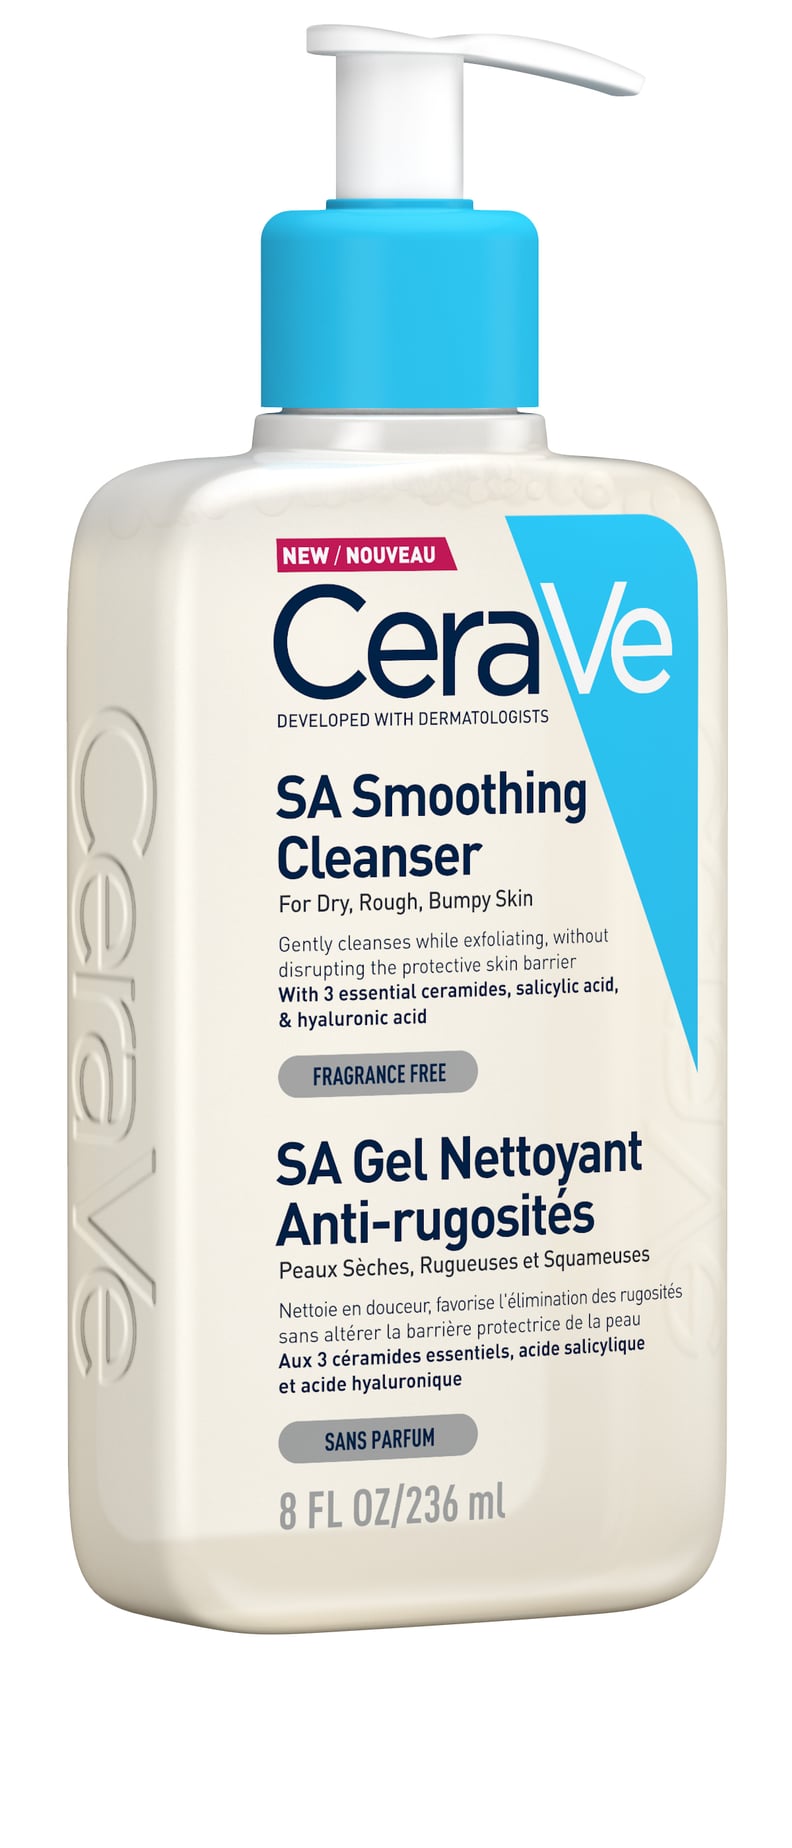 Cerave SA Smoothing Cleanser With Salicylic Acid